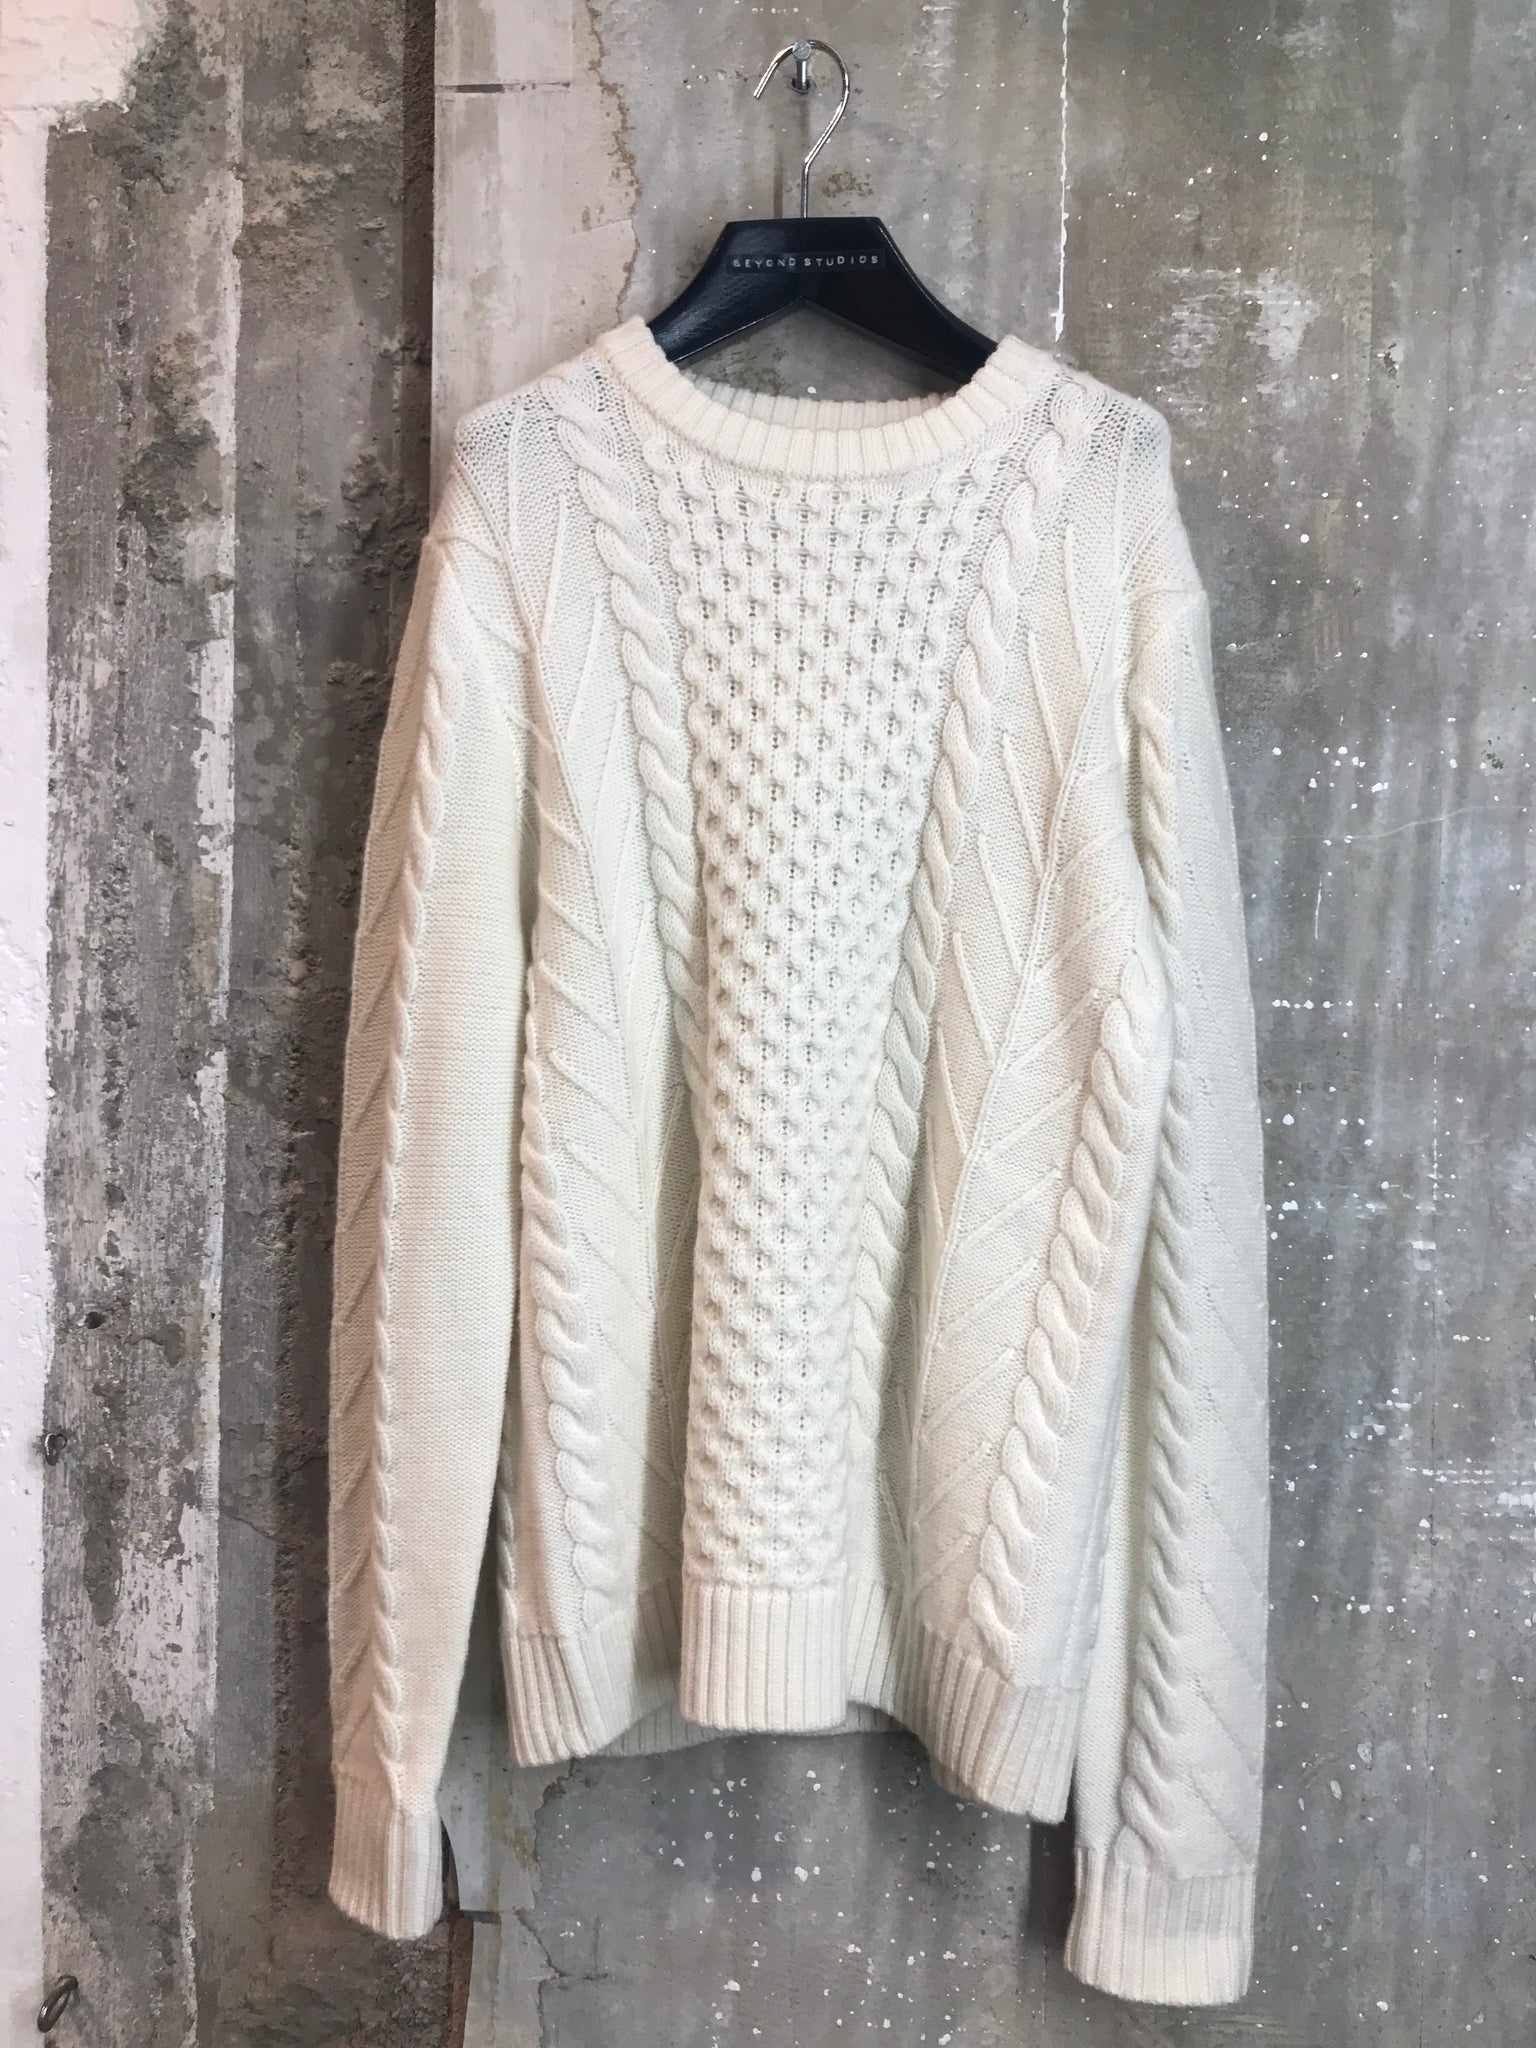 WOOL CABLE KNIT UNISEX SWEATER IN IVORY WHITE